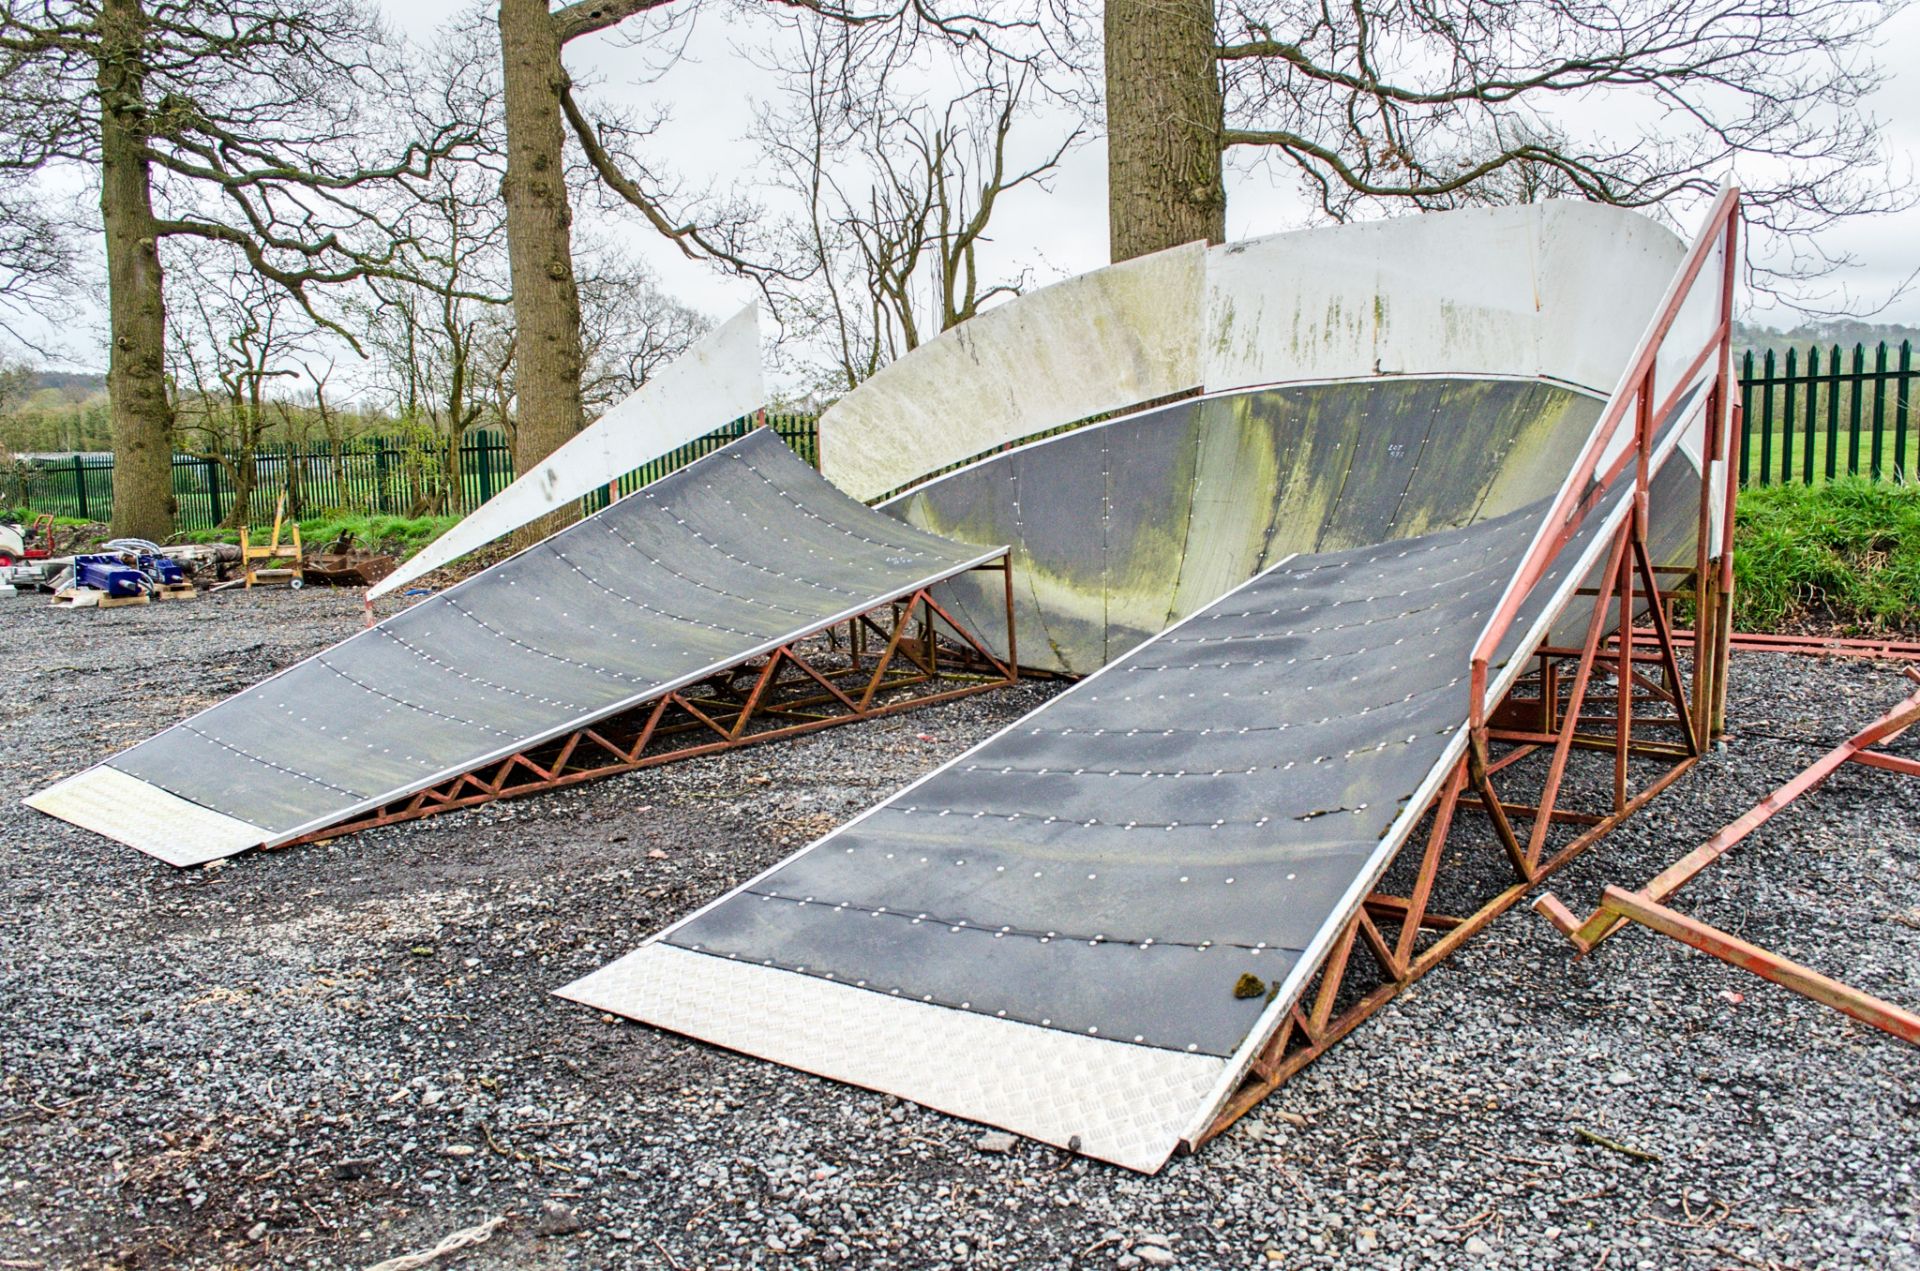 BMX/Skateboard ramp Comprising of: 3 sections Overall size approximately 20 ft deep x 16 ft wide